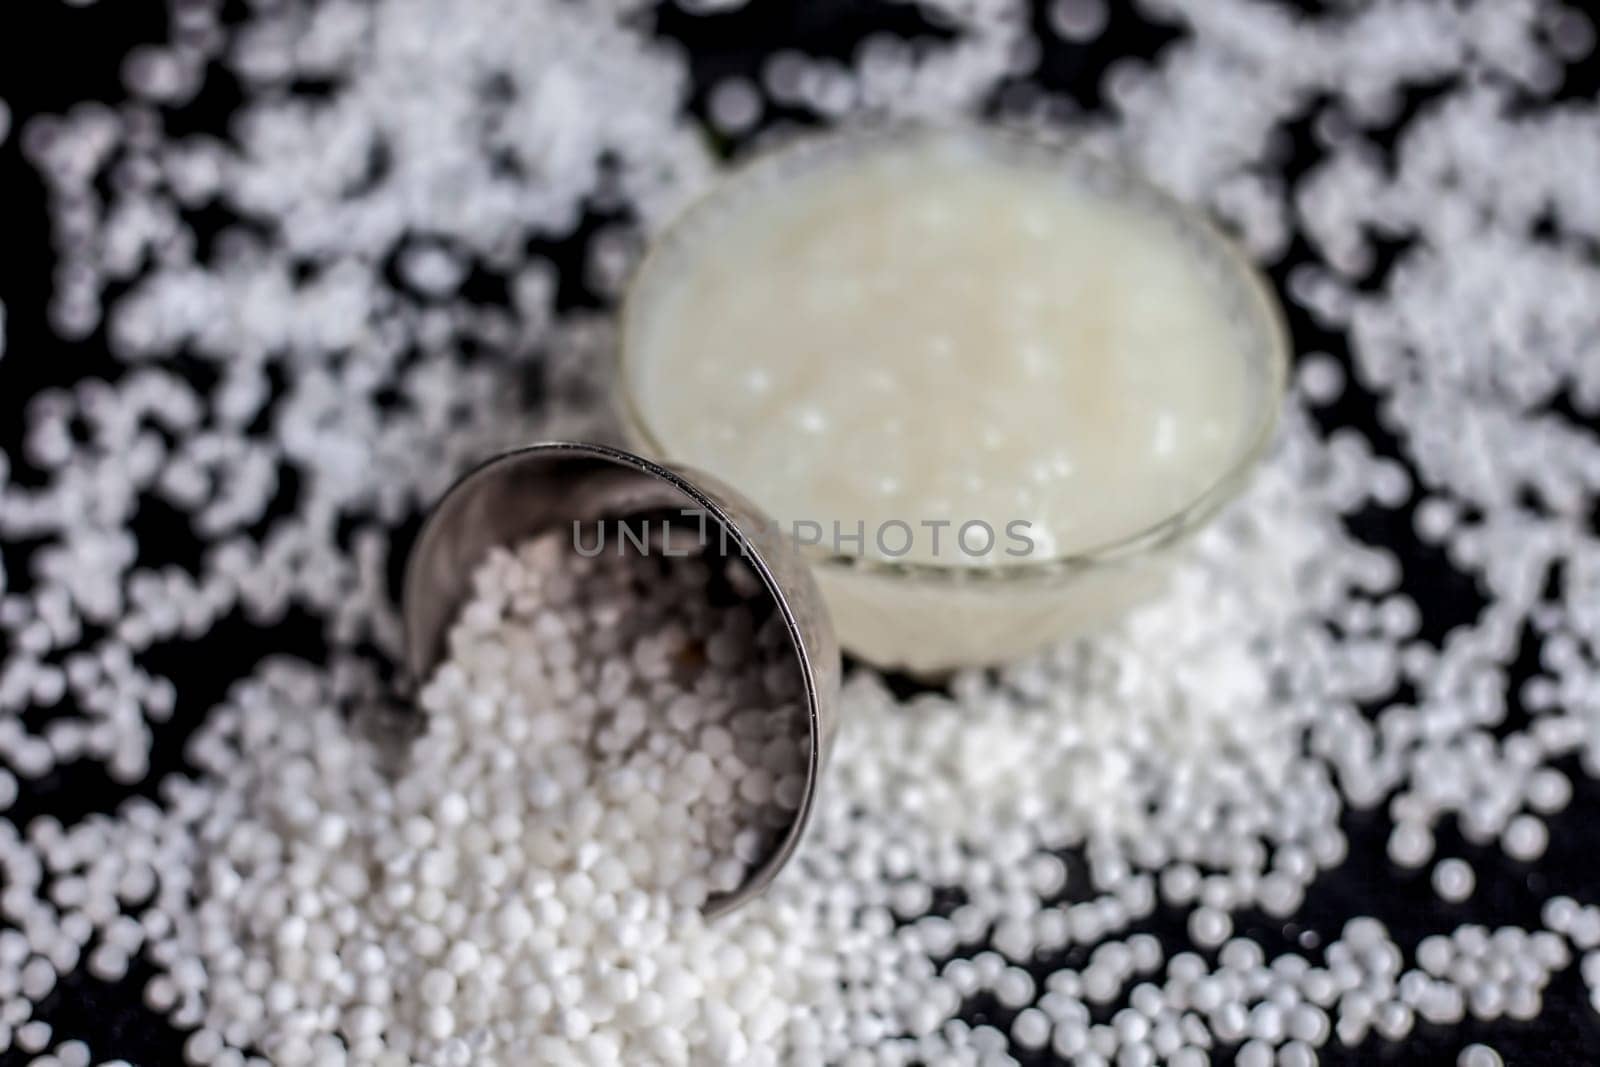 Close-up shot of sabudana ki kheer in a glass bowl along with some raw tapioca pearls and sugar spread on the surface.